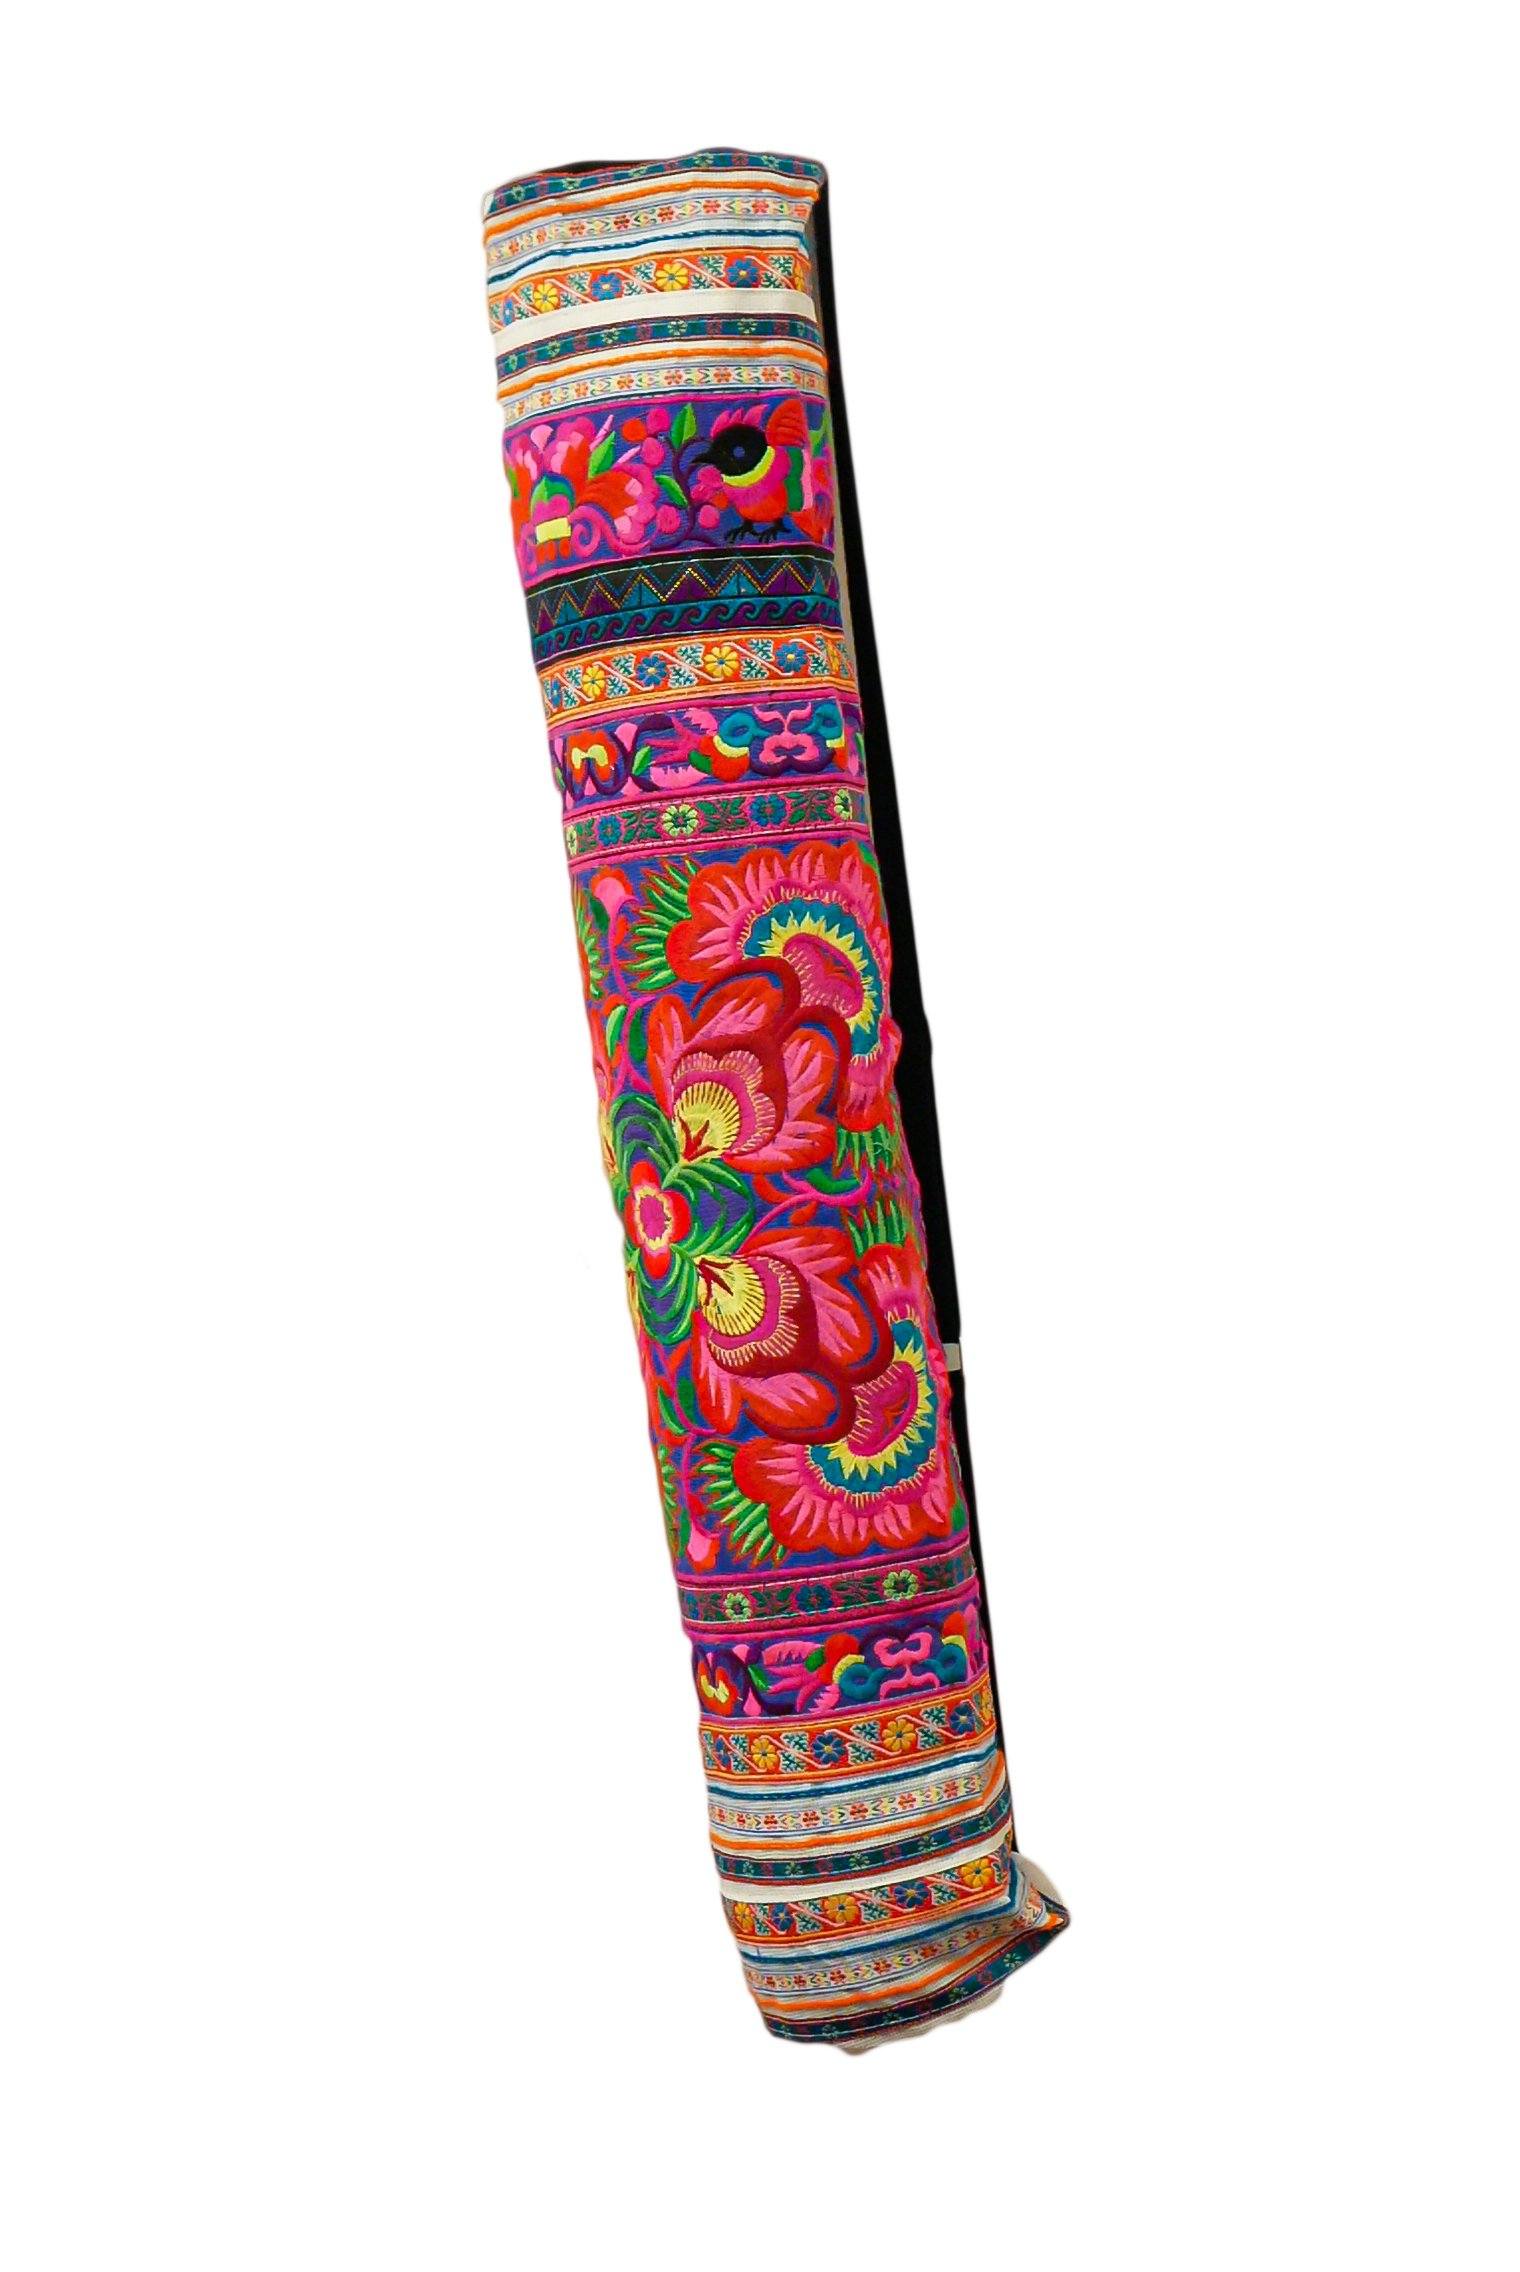 Bohemian Yoga Mat Bag Carrier Embroidered Hill tribe ethnic D - CCCollections